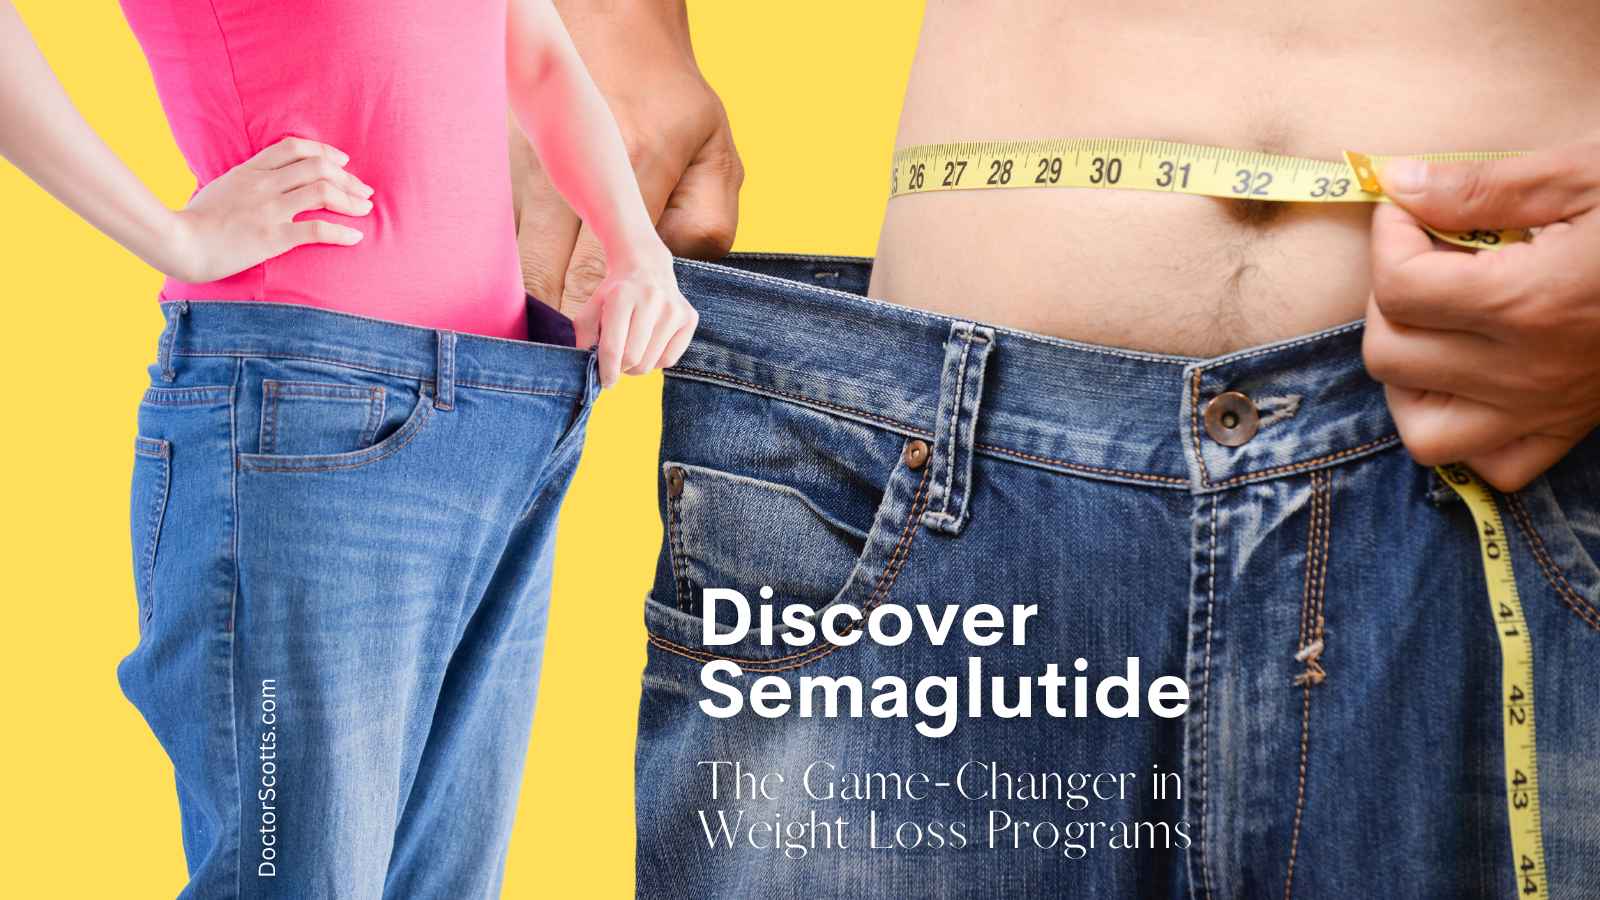 You Can Now Use Your HSA/FSA On Semaglutide Weight Loss